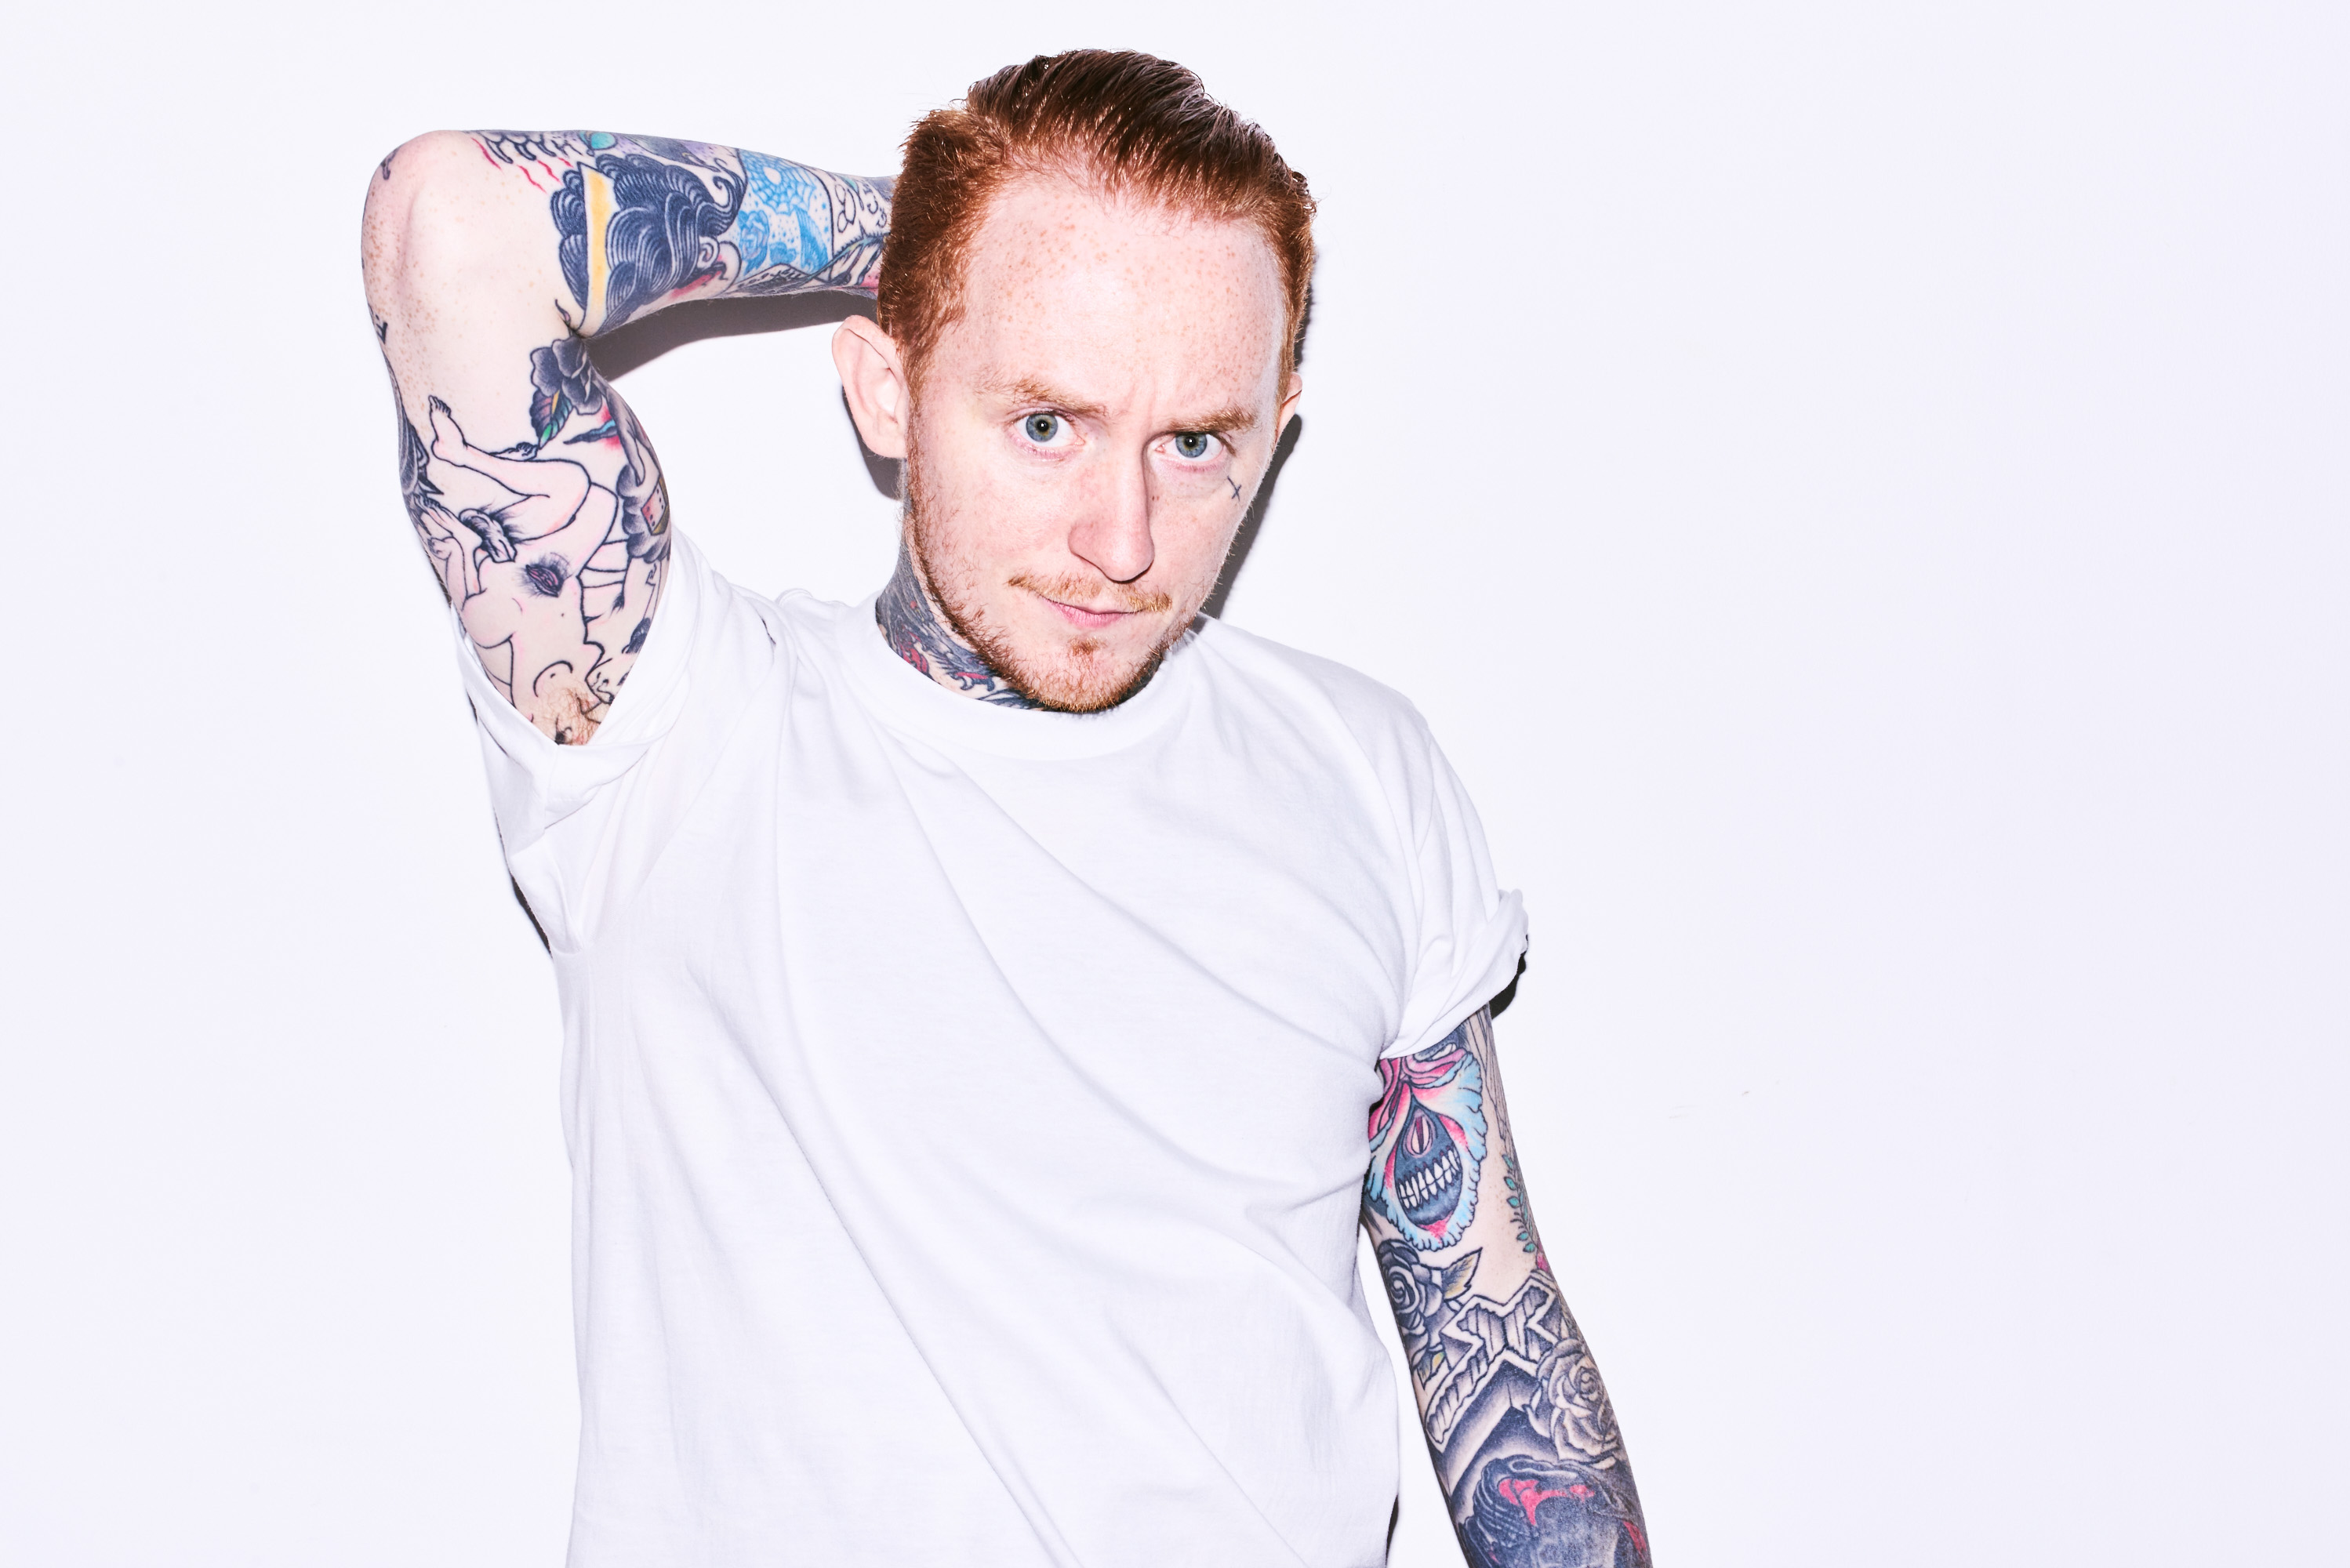 Frank Carter And The Rattlesnakes: “Now I just don’t care if I upset ...